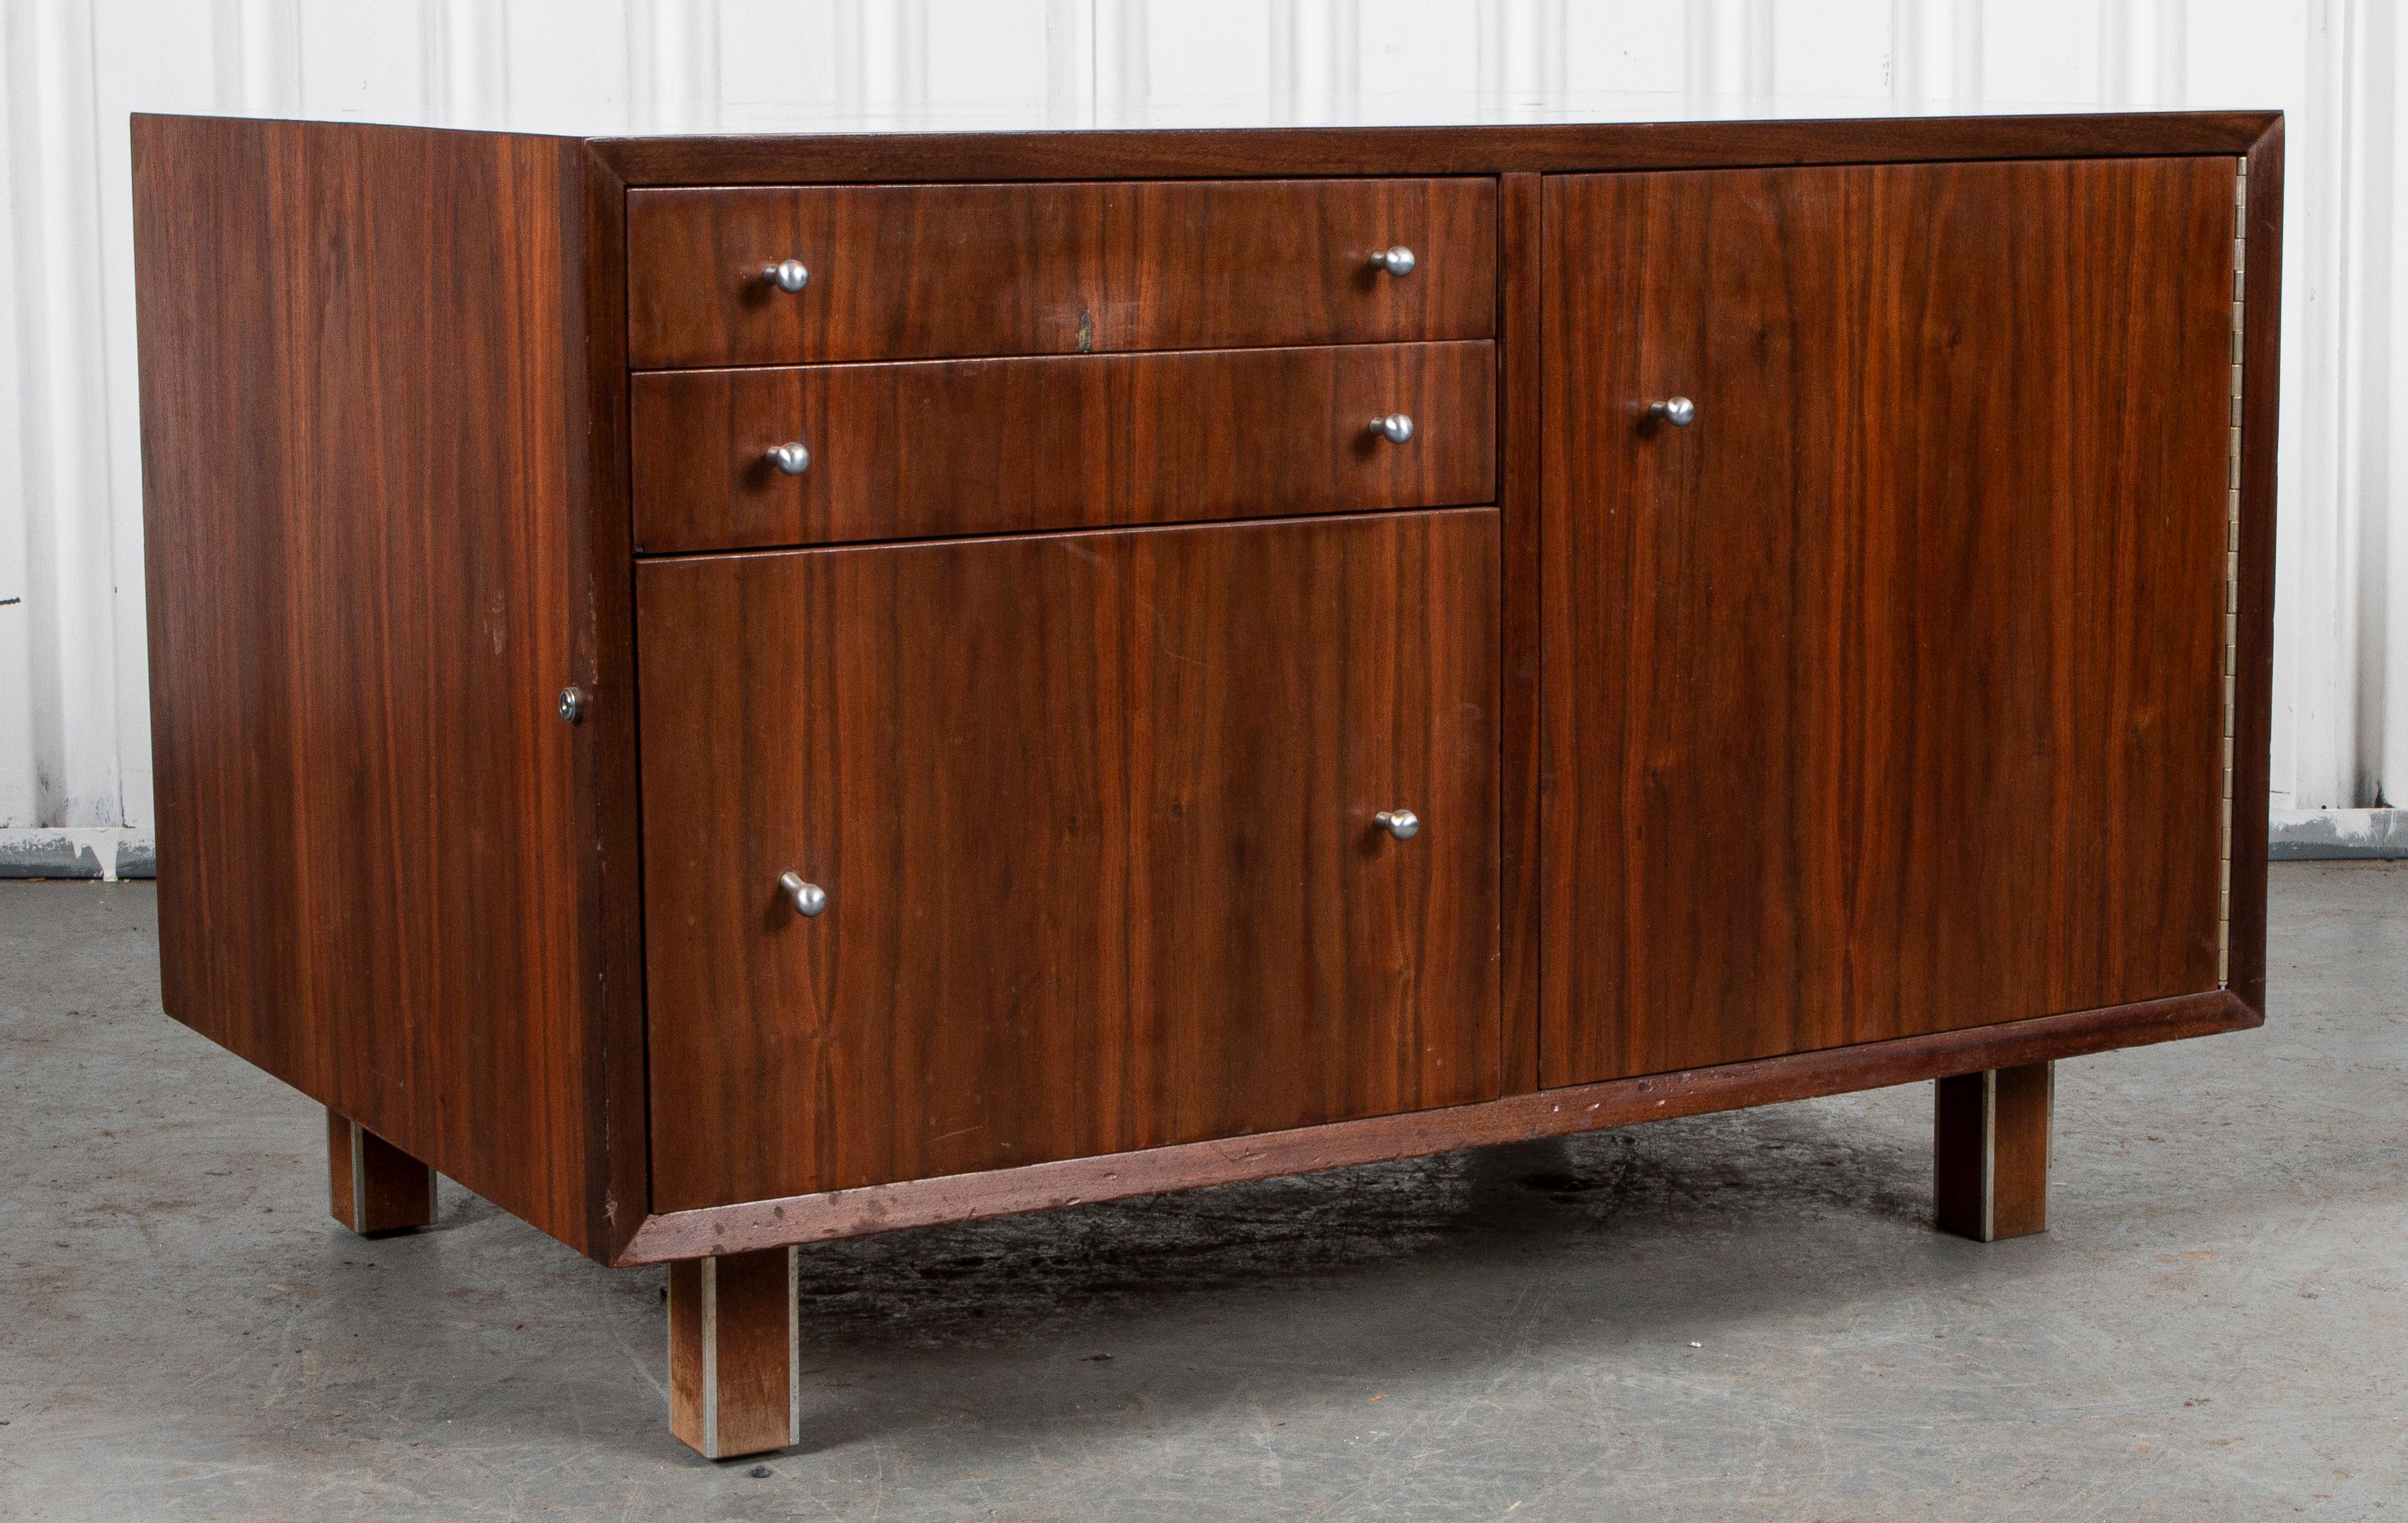 Danish Modern teak and white laminate-mounted credenza with three drawers opposite a cabinet door with steel pulls and steel-mounted square legs.

Dealer: S138XX